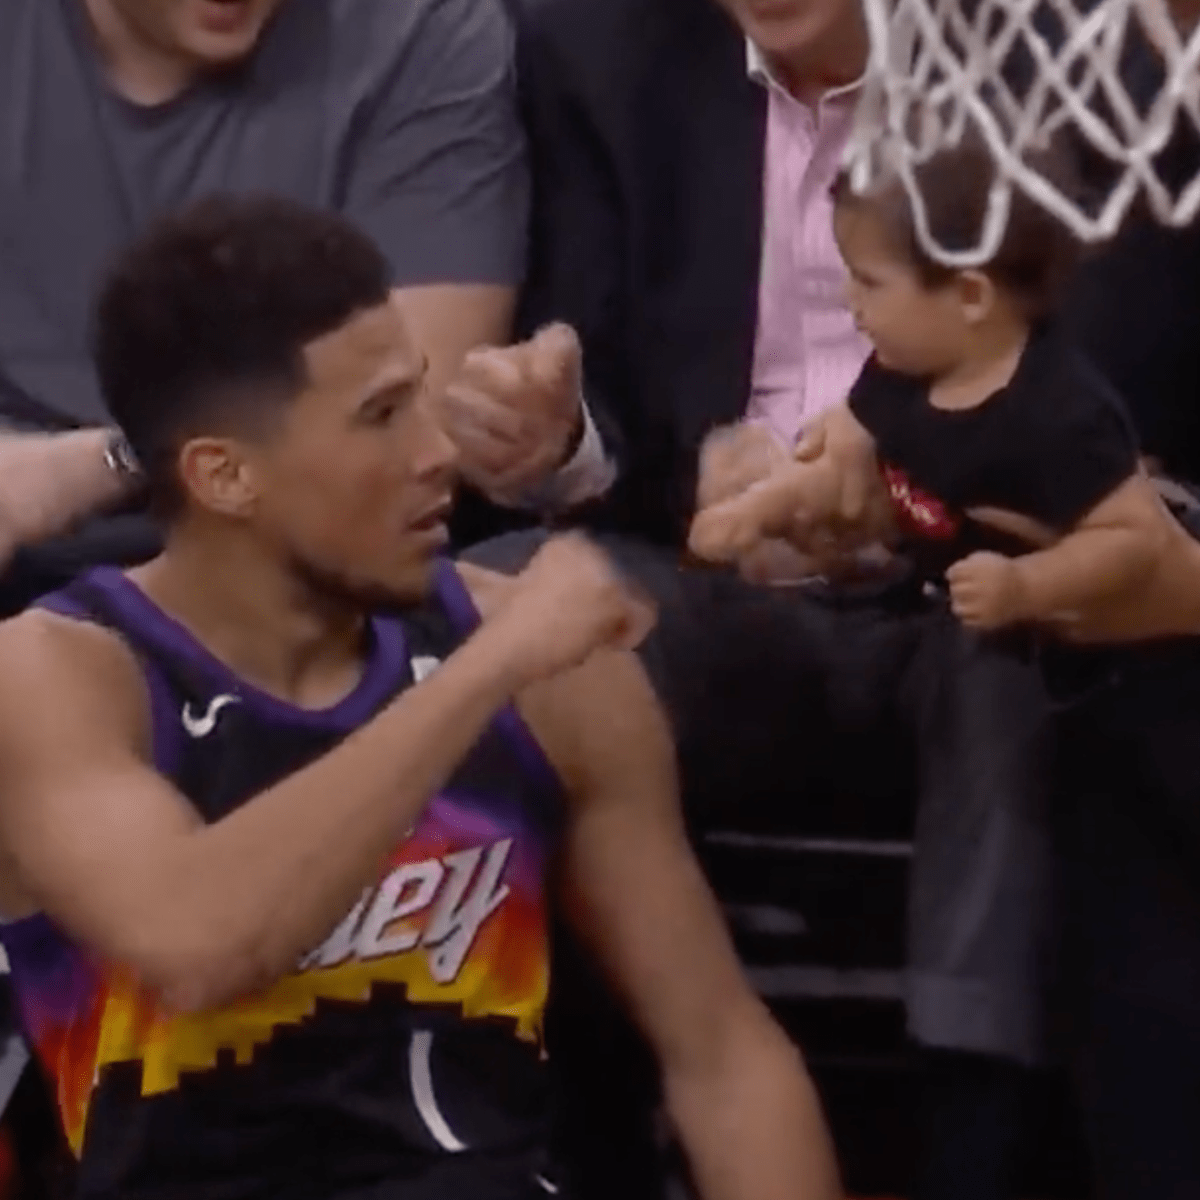 Suns SG Devin Booker fist bumps baby in epic moment after heat check bucket